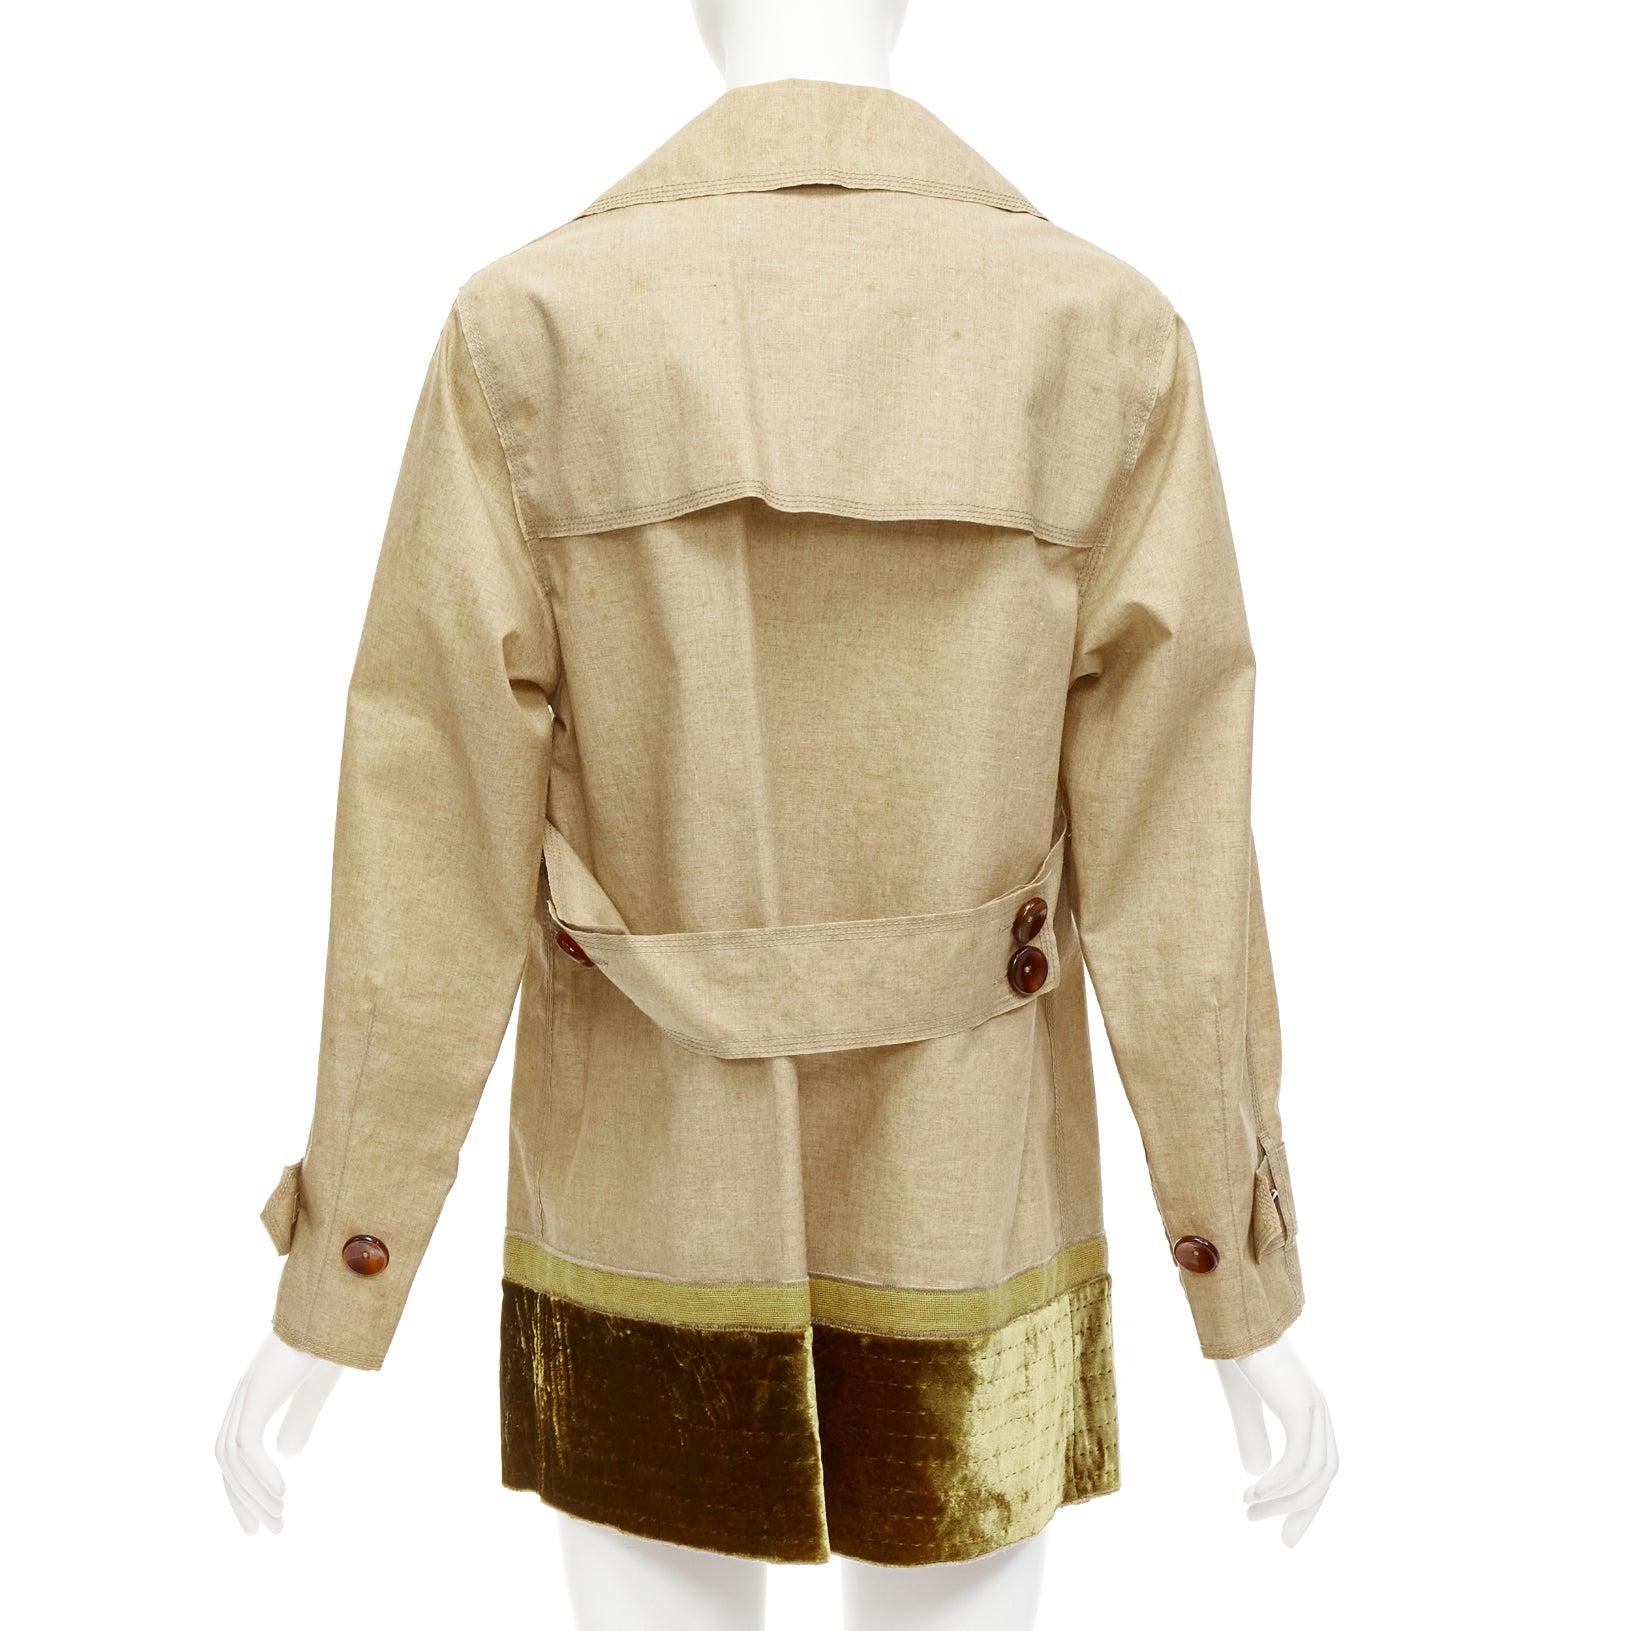 LOUIS VUITTON khaki coated linen gold velvet hem double breasted trench coat FR36 S
Reference: DYTG/A00017
Brand: Louis Vuitton
Designer: Marc Jacobs
Collection: Runway
Material: Linen, Velvet
Color: Khaki, Brown
Pattern: Solid
Closure: Button
Extra